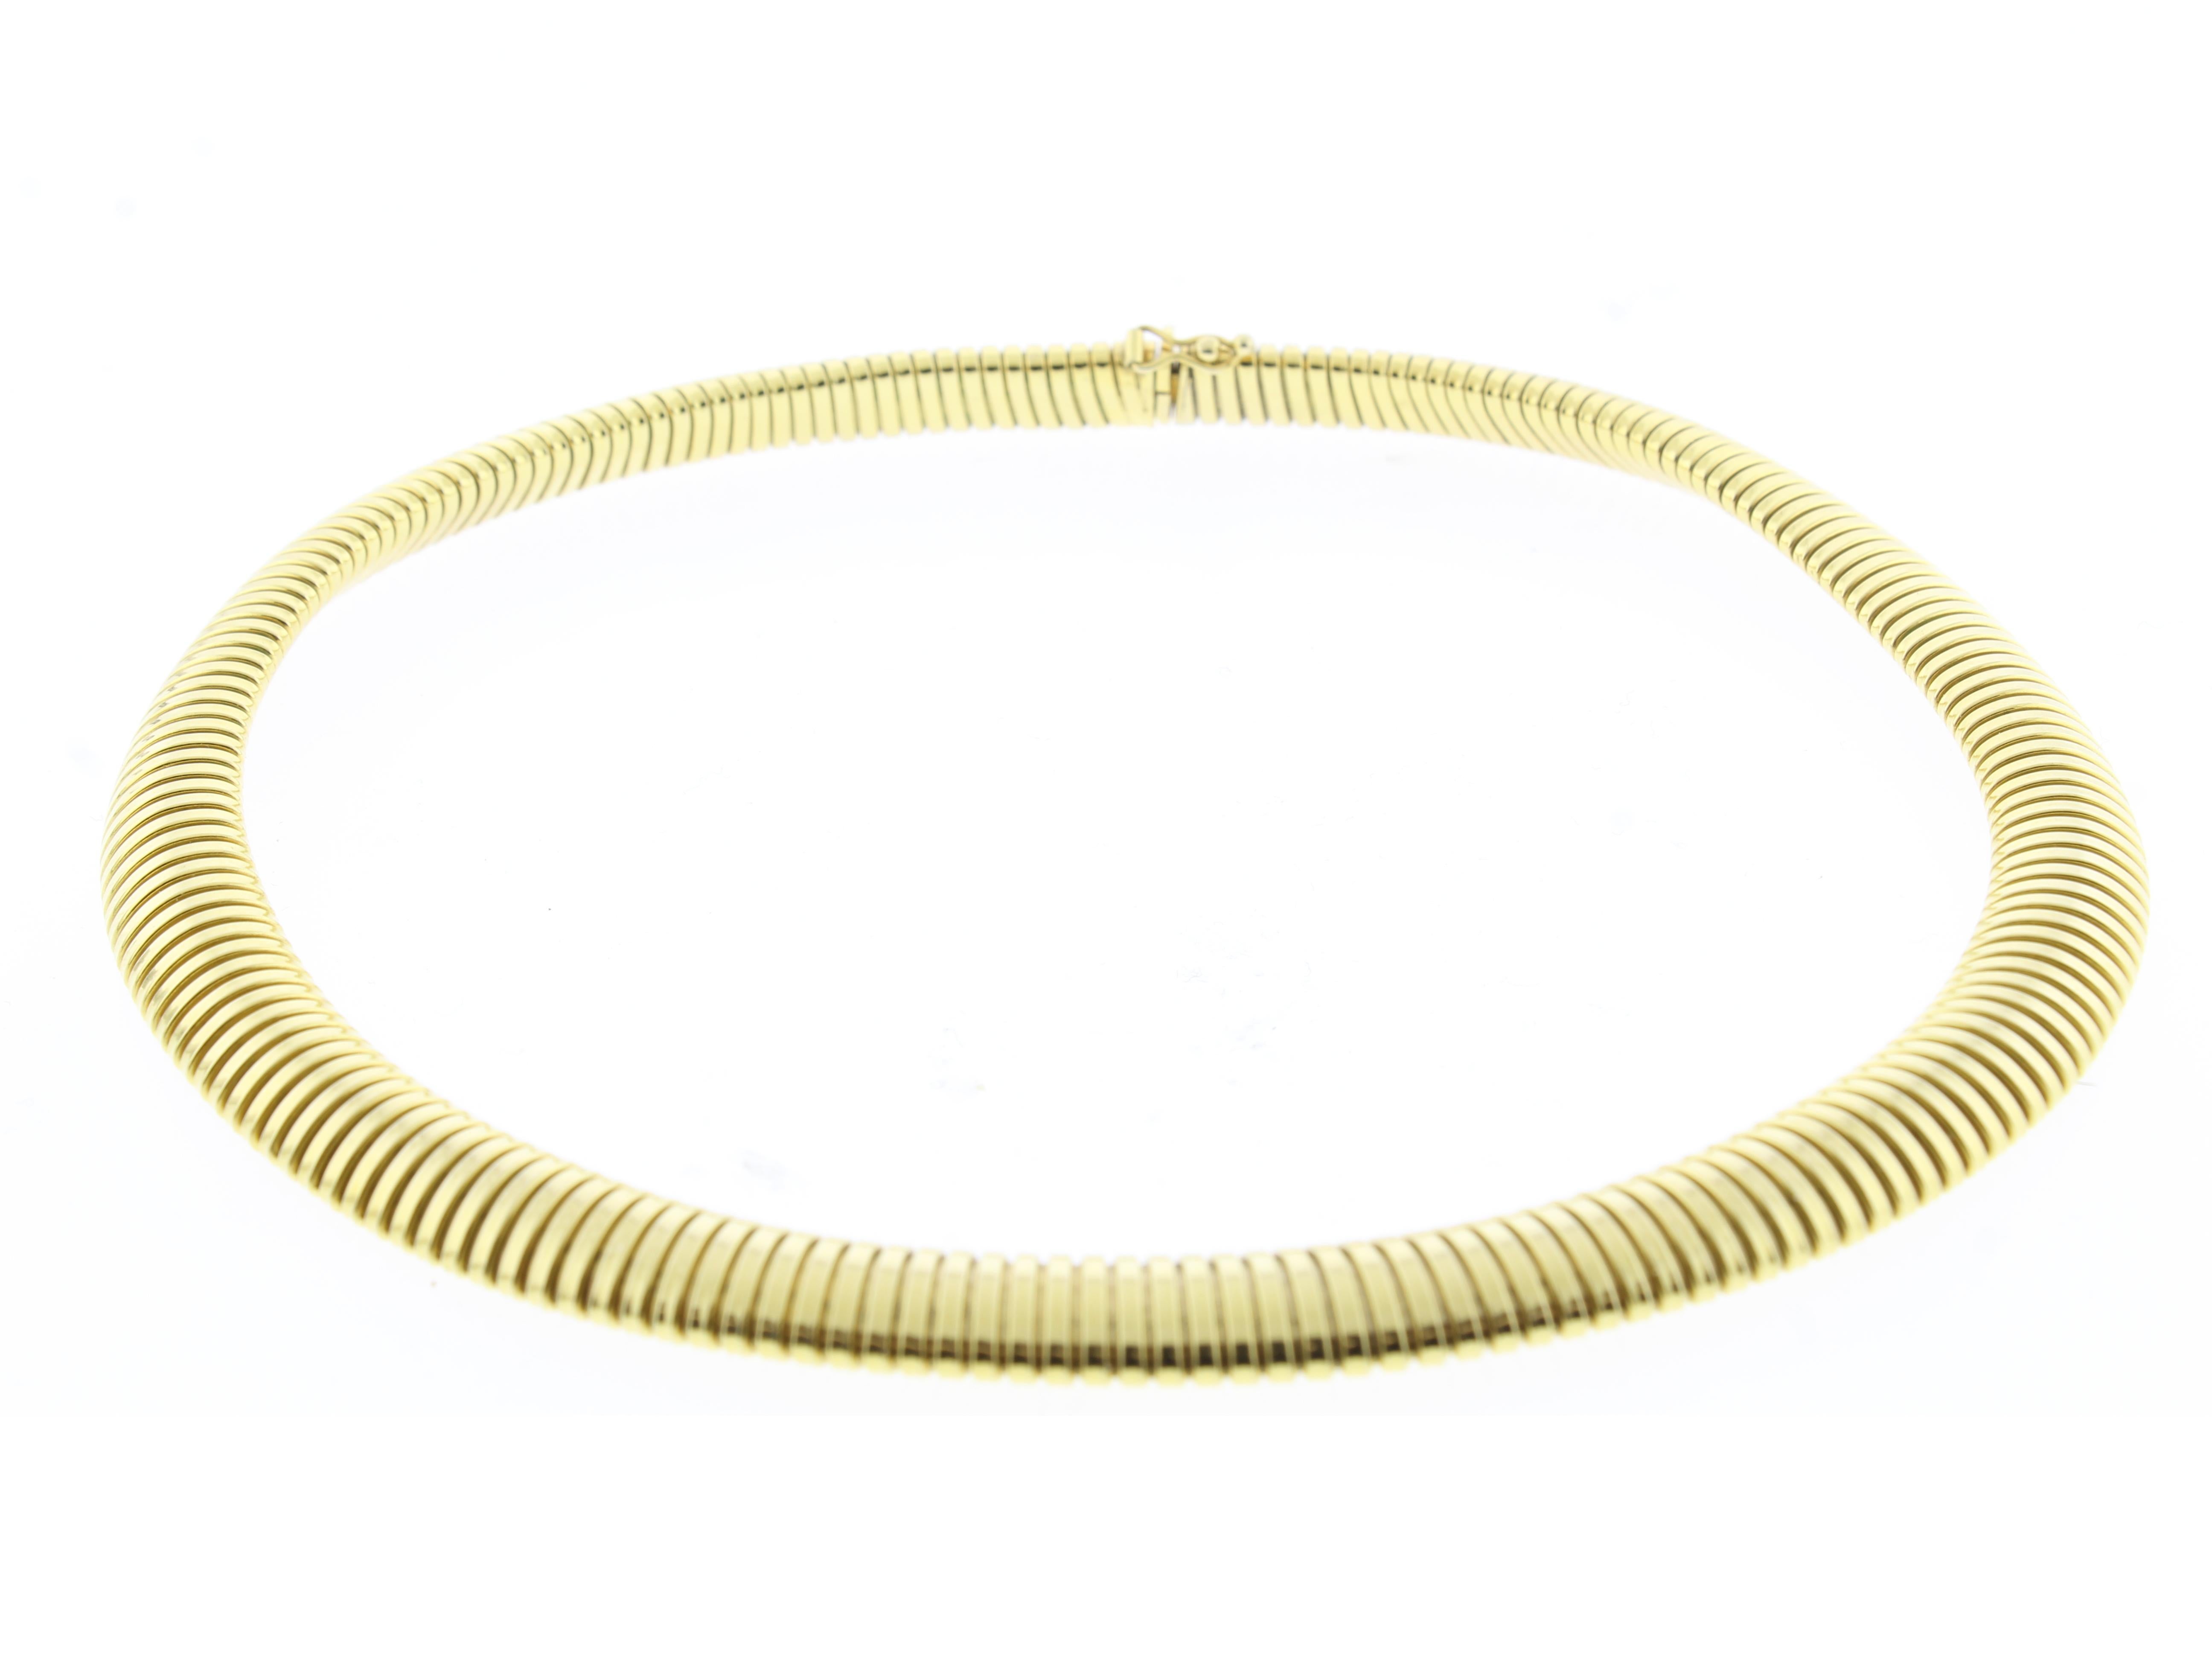 A Classic Italian tubogas necklace. Tubogas translates literally to “gas pipe” and is the descriptive name given to a type of chain formed from a pair of interlocking gold strips wrapped tightly together. This forms a flexible and hollow tubular